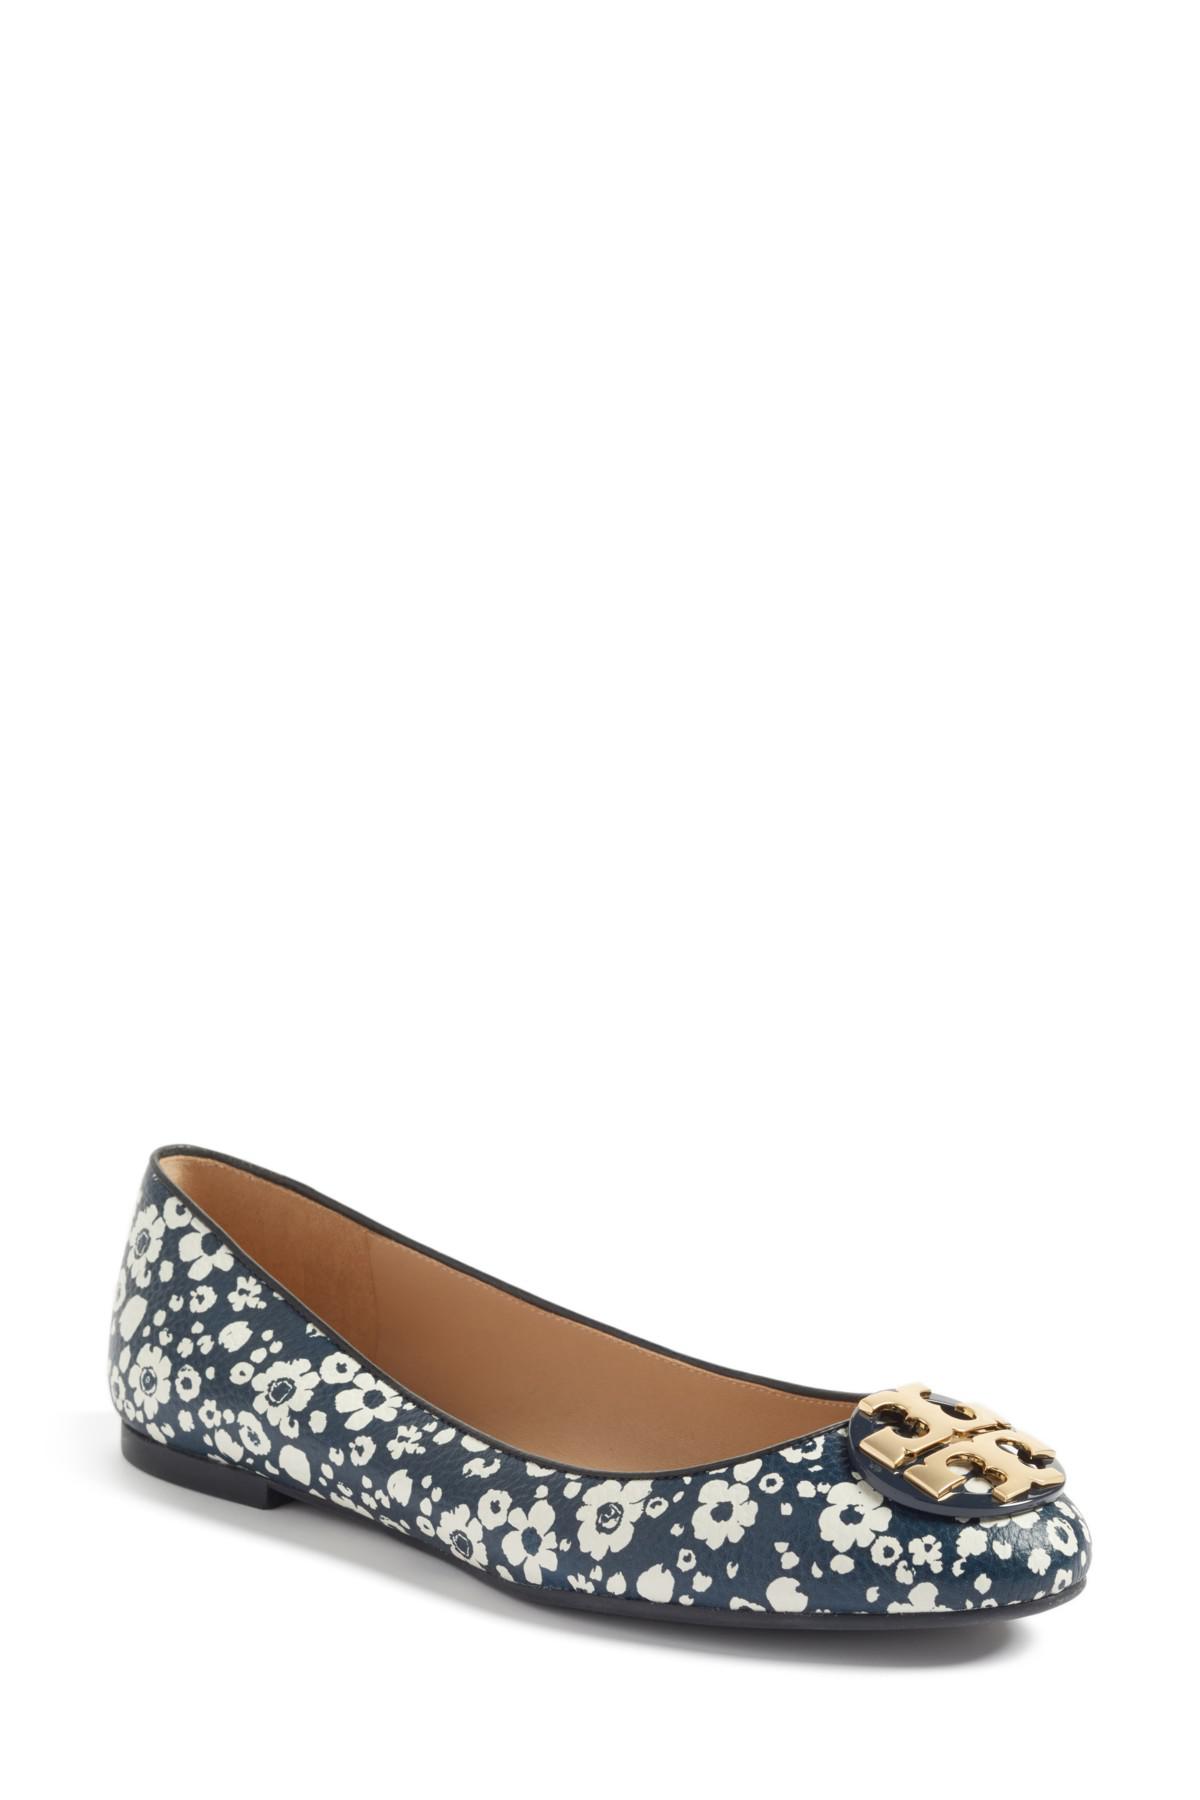 claire ballet flat tory burch